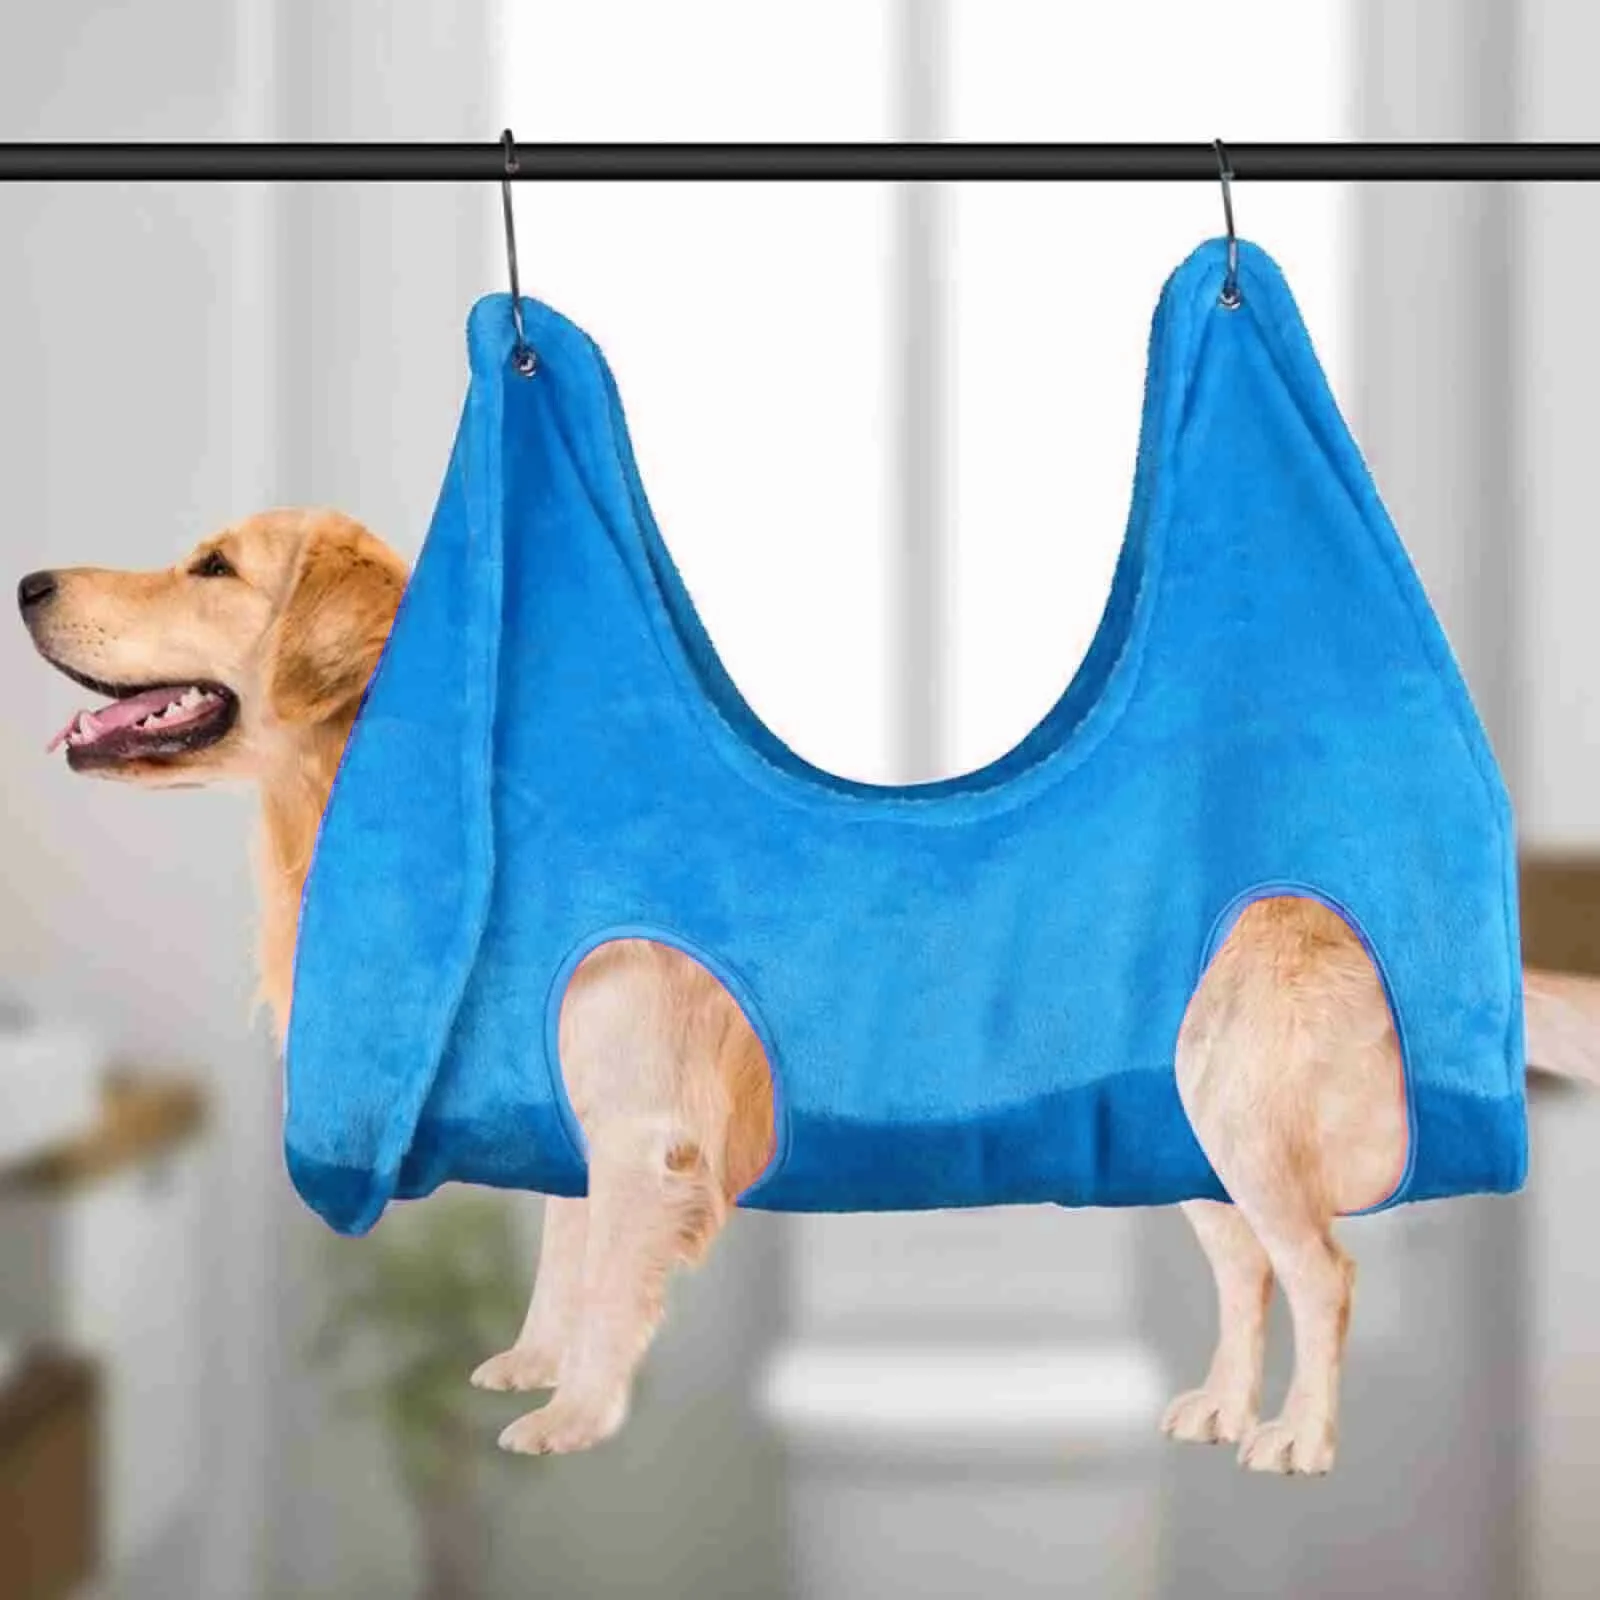 Pet grooming hammock restraint bag for cats and dogs – ideal for nail clipping, trimming, and bathing